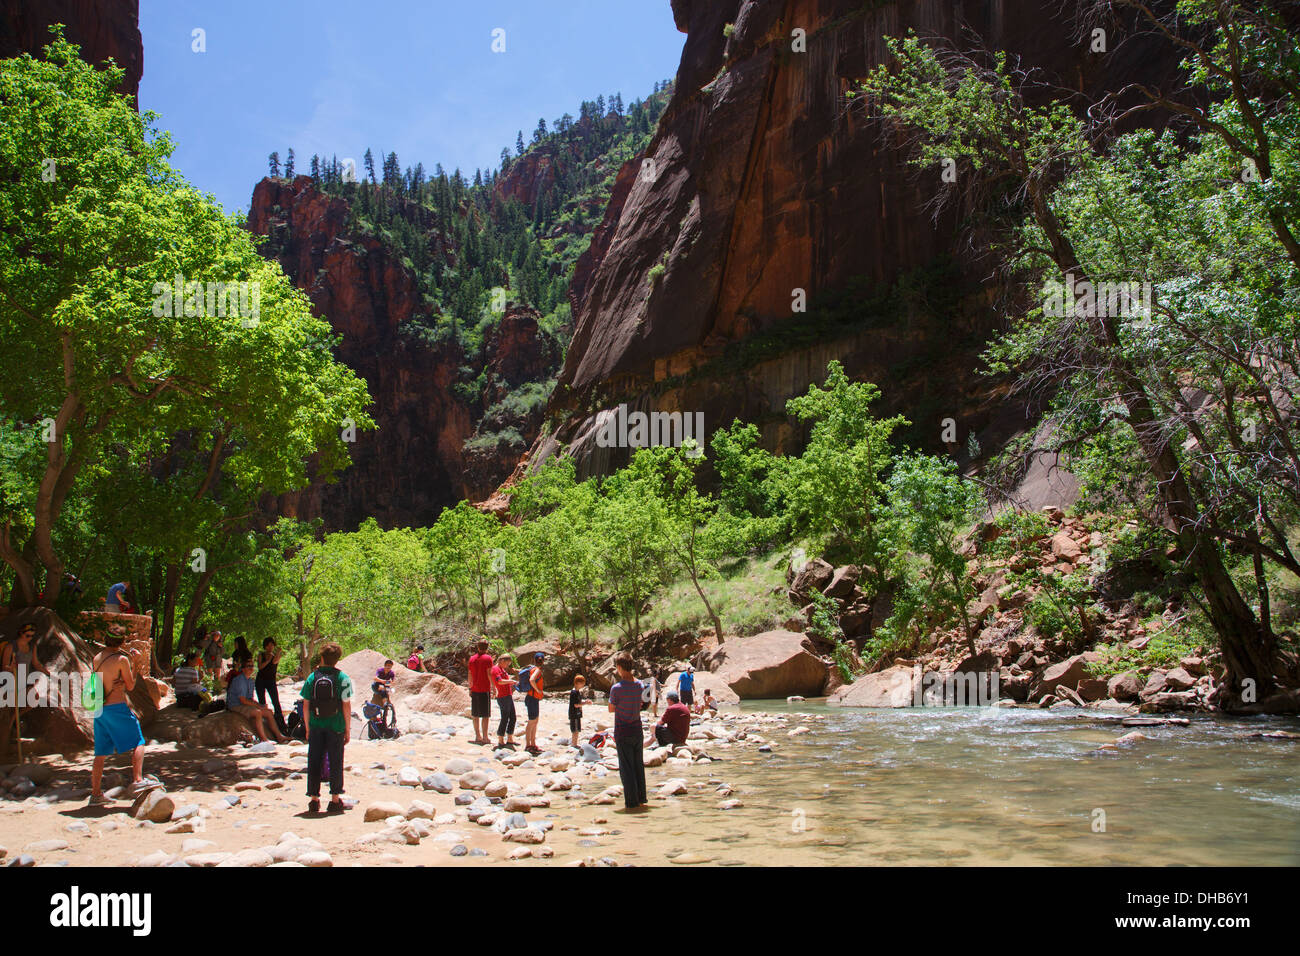 Hikers in The Narrows on the Virgin River, Zion National Park, Utah. Stock Photo